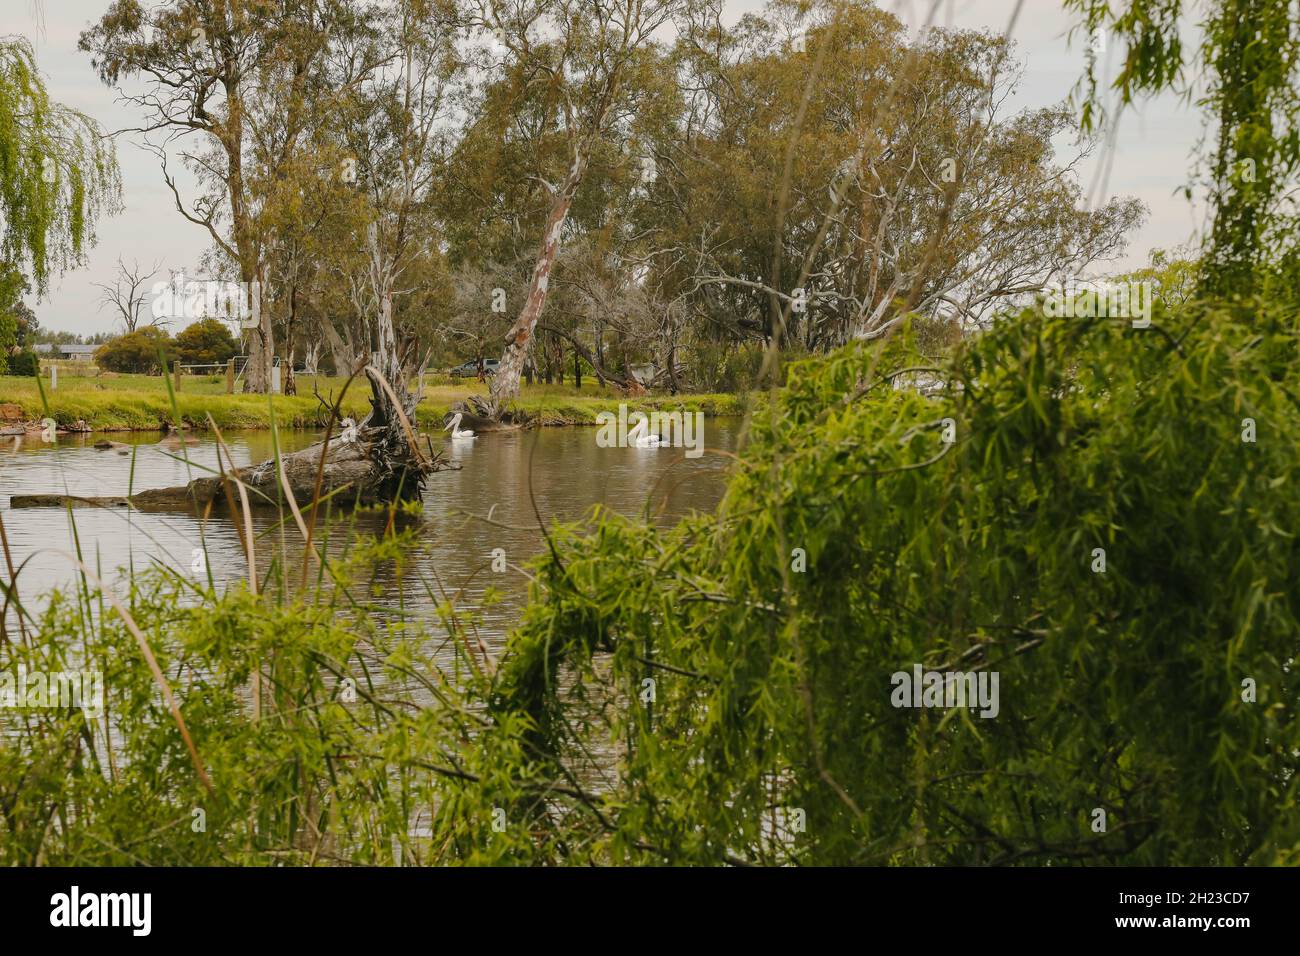 Tranquil natural setting with pelicans swimming at Kow Swamp in Central Victoria, Australia Stock Photo